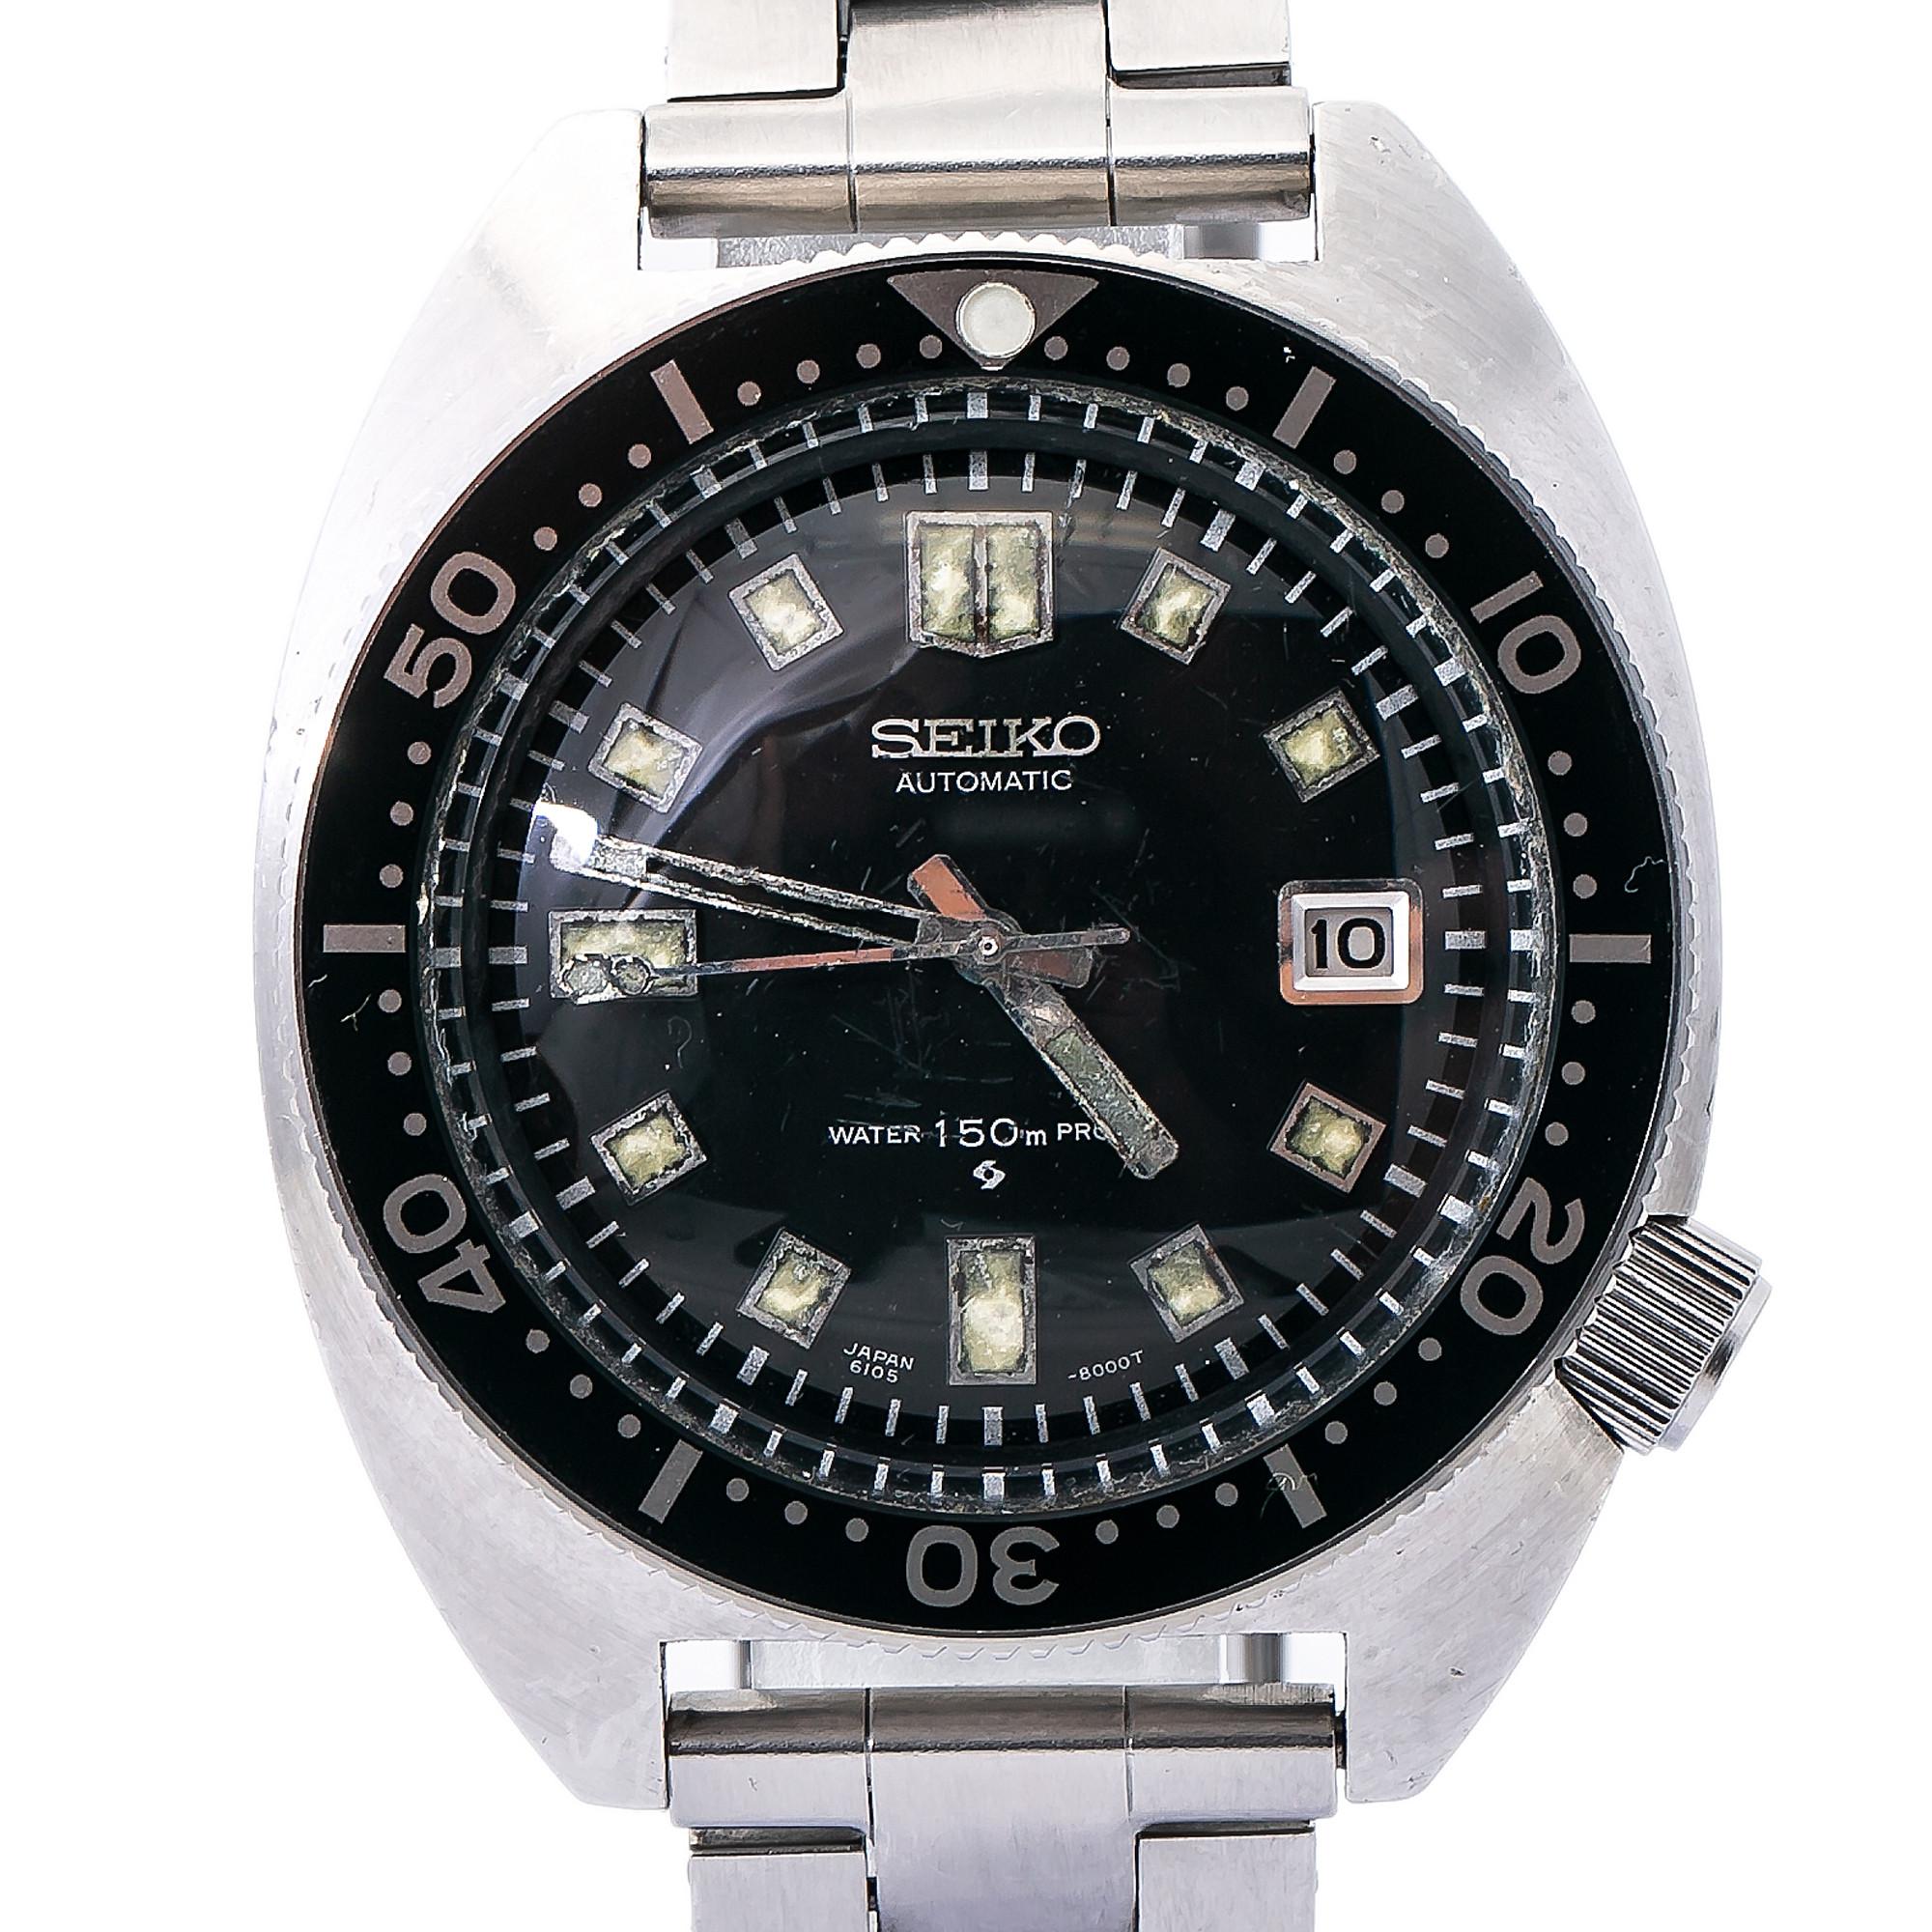 Modern Seiko Diver's 6105-8000 Automatic Vintage Men's Watch Year1969 SS For Sale